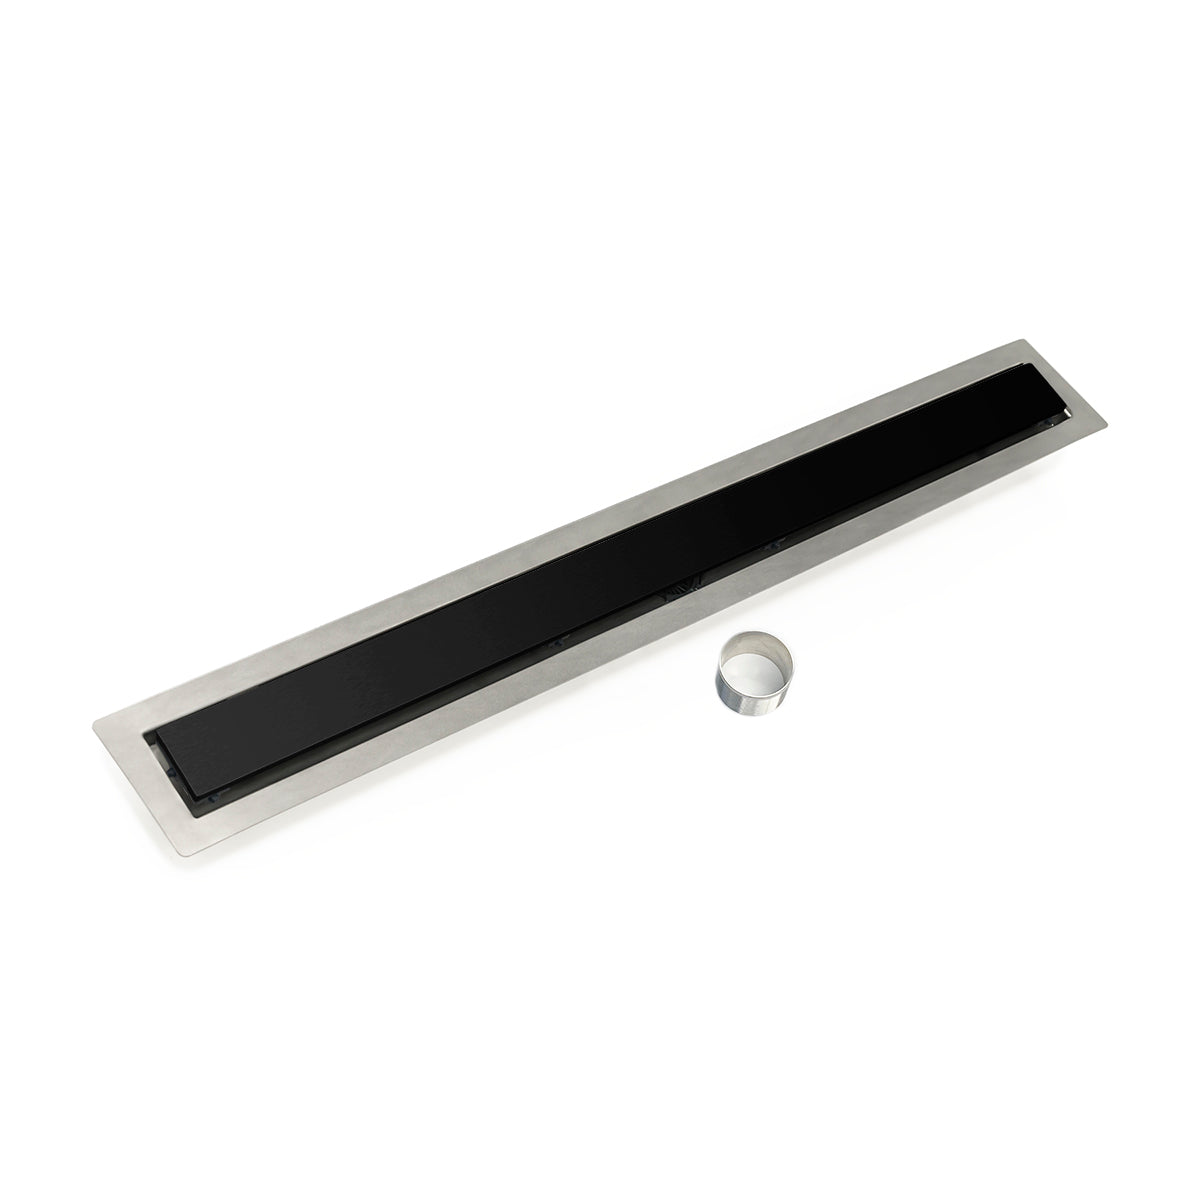 Infinity Drain 42" FCB Series Double Waterproofing Linear Drain Kit with 2 1/2" Solid Grate